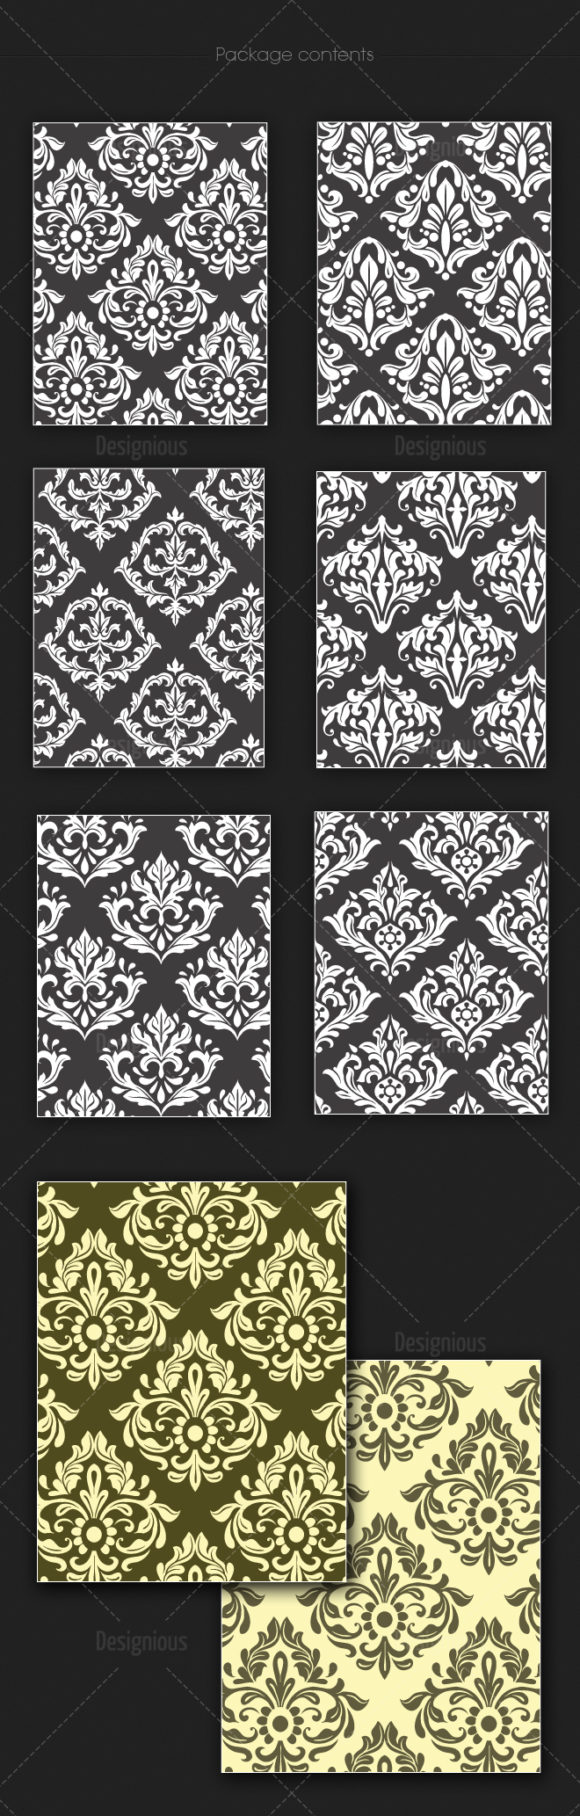 Seamless Patterns Vector Pack 136 2